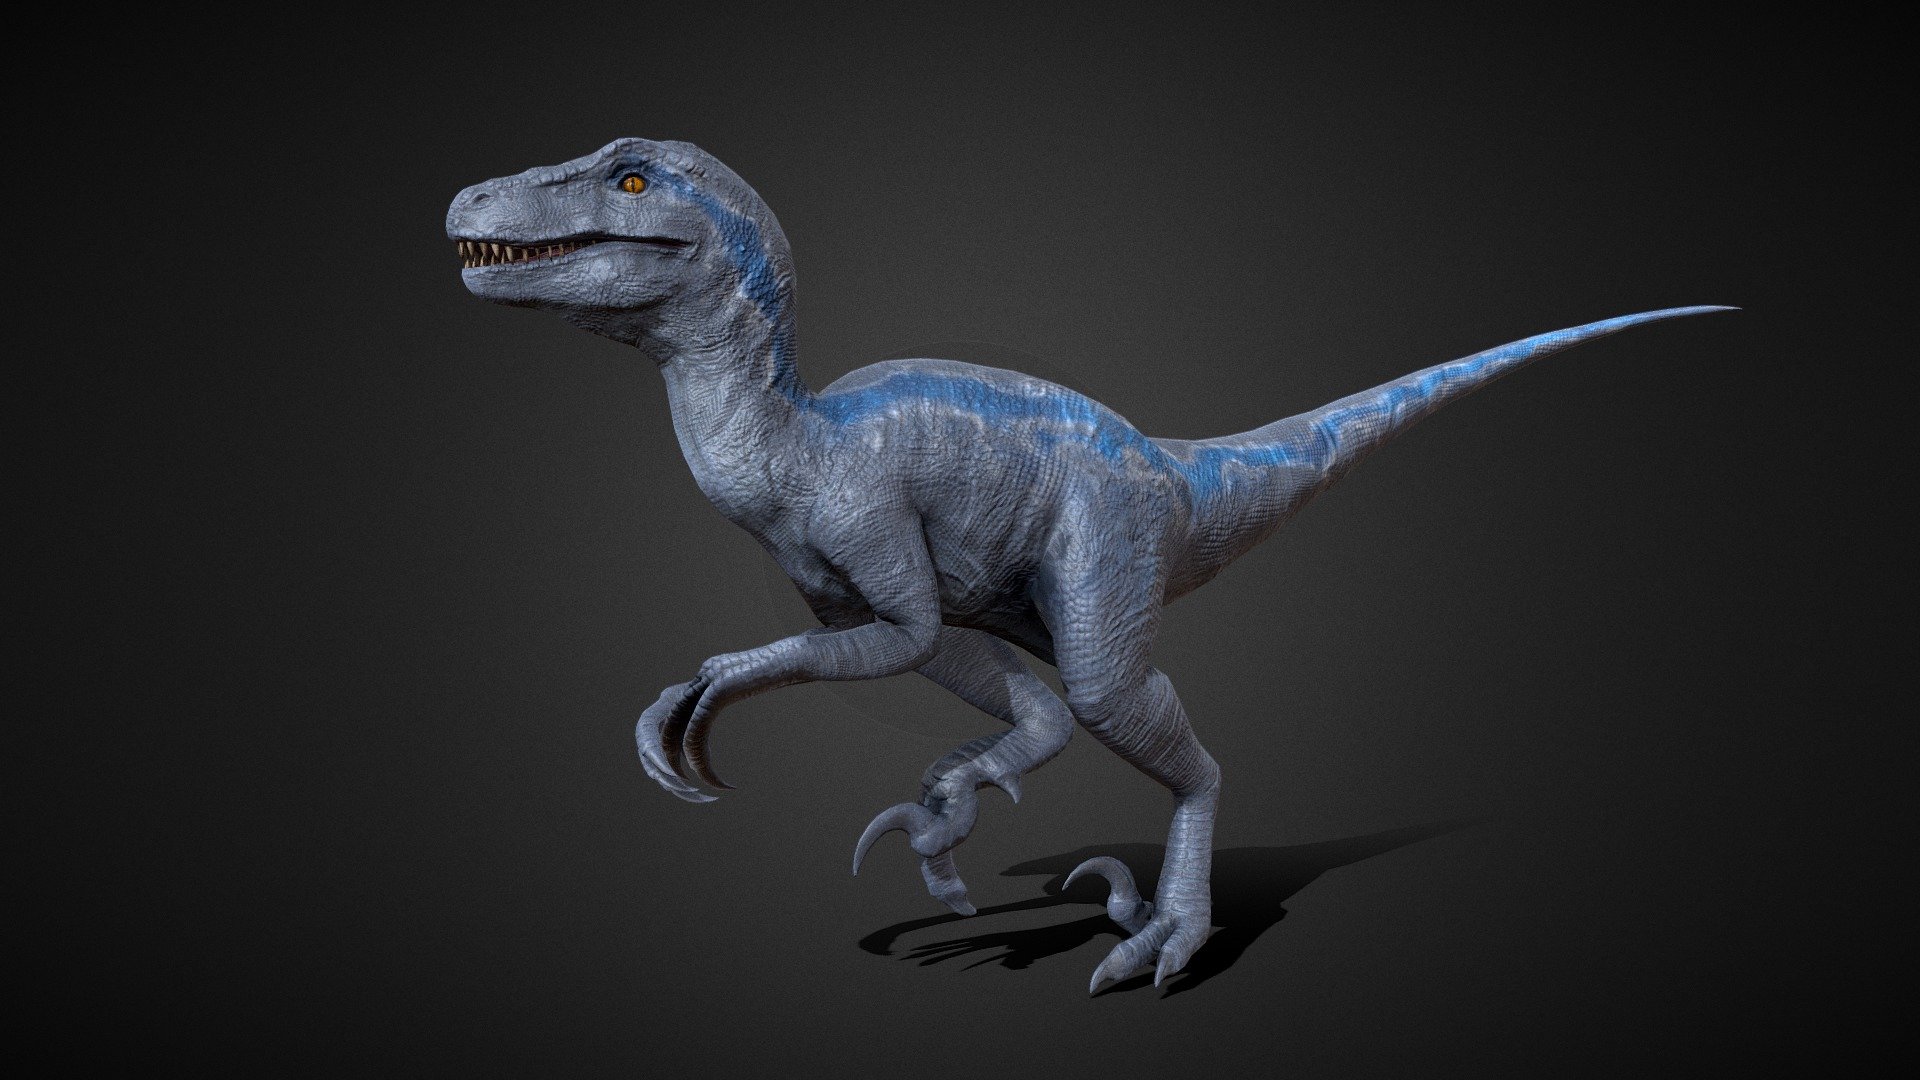 Blue is a female Velociraptor that appears in Jurassic World franchise. She is the oldest of the four raptors in her pack consisting of her sisters, Delta, Echo, and Charlie. Initially trained by Owen Grady for the IBRIS Project. This genetically modified Velociraptor adds a new dimension to the Jurassic World narrative.

Render Video: https://youtu.be/_4-v9b0wy4Y?si=D5iyEdmv0krtgAyw

File: Maya - Blender - Substance Painter - Zbrush.

OBJ HighPoly File.

Rigged File.

10 Animations: Idle, Idle 2, Run, Spint, Taunt,Bite, Bite 2, Slash, Roar, Die

Lowpoly: 5.588 Verts - 10.714 Tris.

Only 1 material.

Clean Topology.

All materials work for PBR rendering.
 - Blue Raptor - Velociraptor - HiepVu - Buy Royalty Free 3D model by HiepVu 3d model